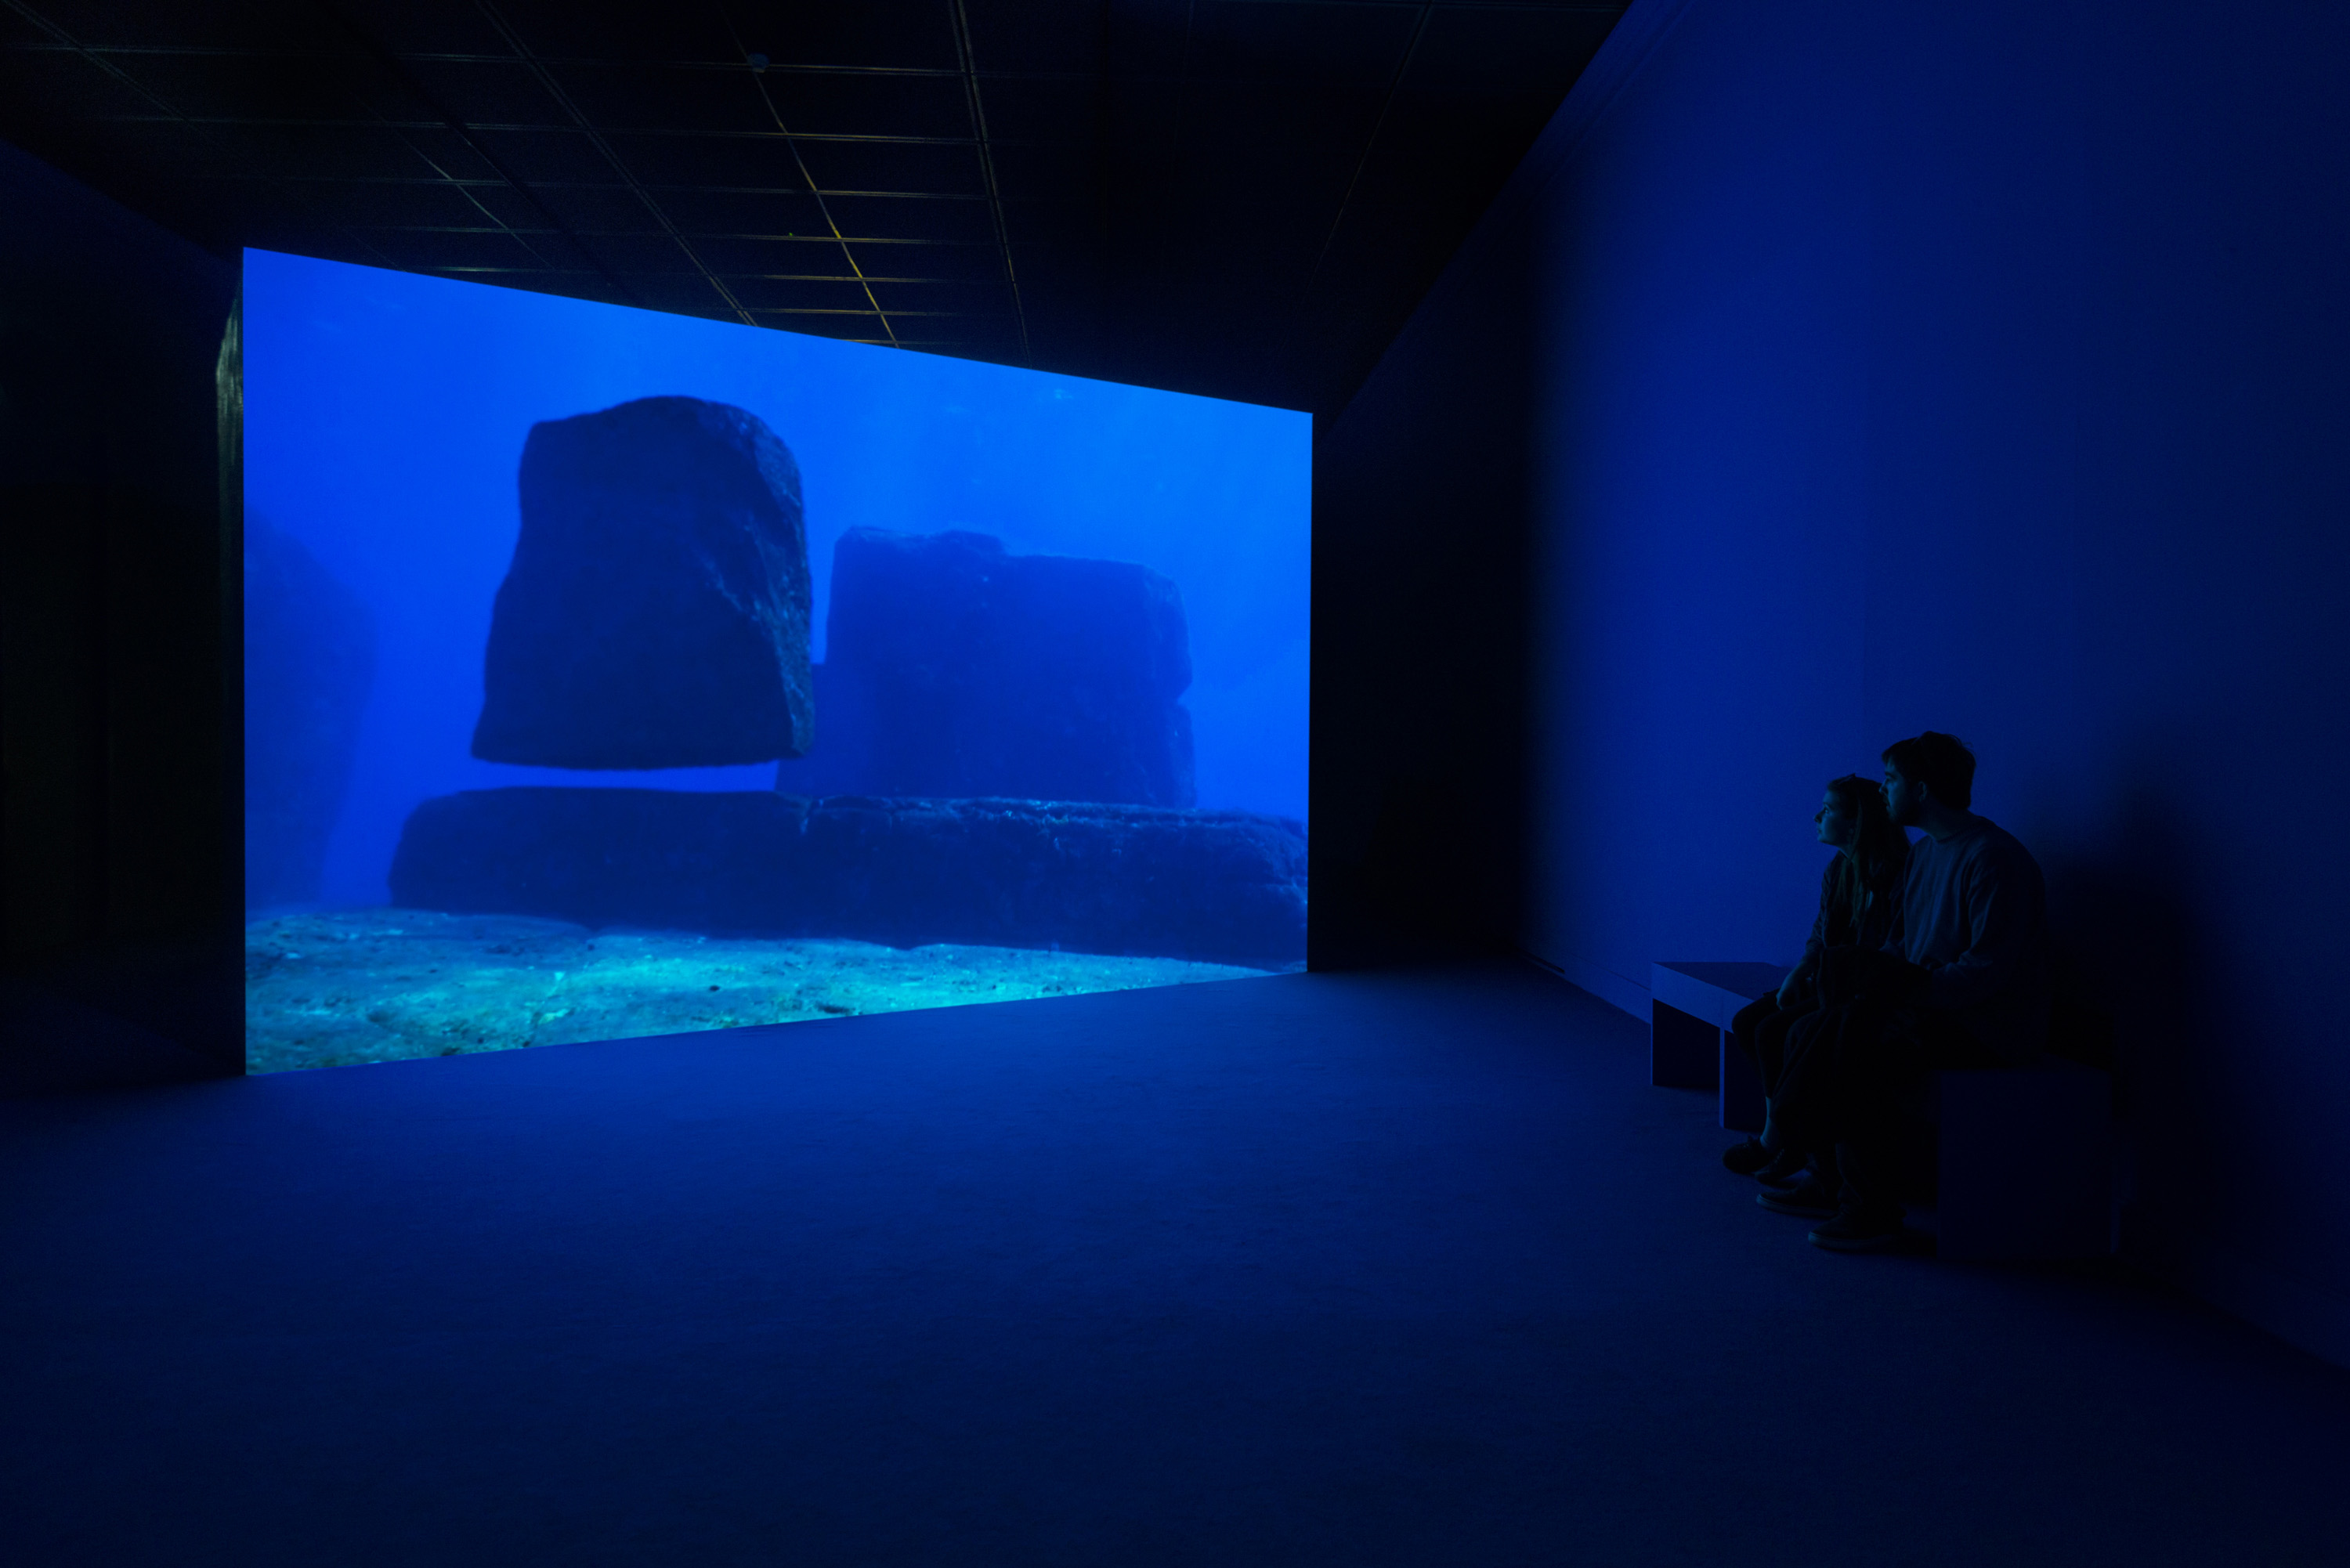 Angelika Markul, “Yonaguni Area,” 2016, video installation, various dimensions. Soundtrack by Simon Ripoll Hurier. On view at CSW Ujadowski Castle, Warsaw. Image courtesy of the artist. 